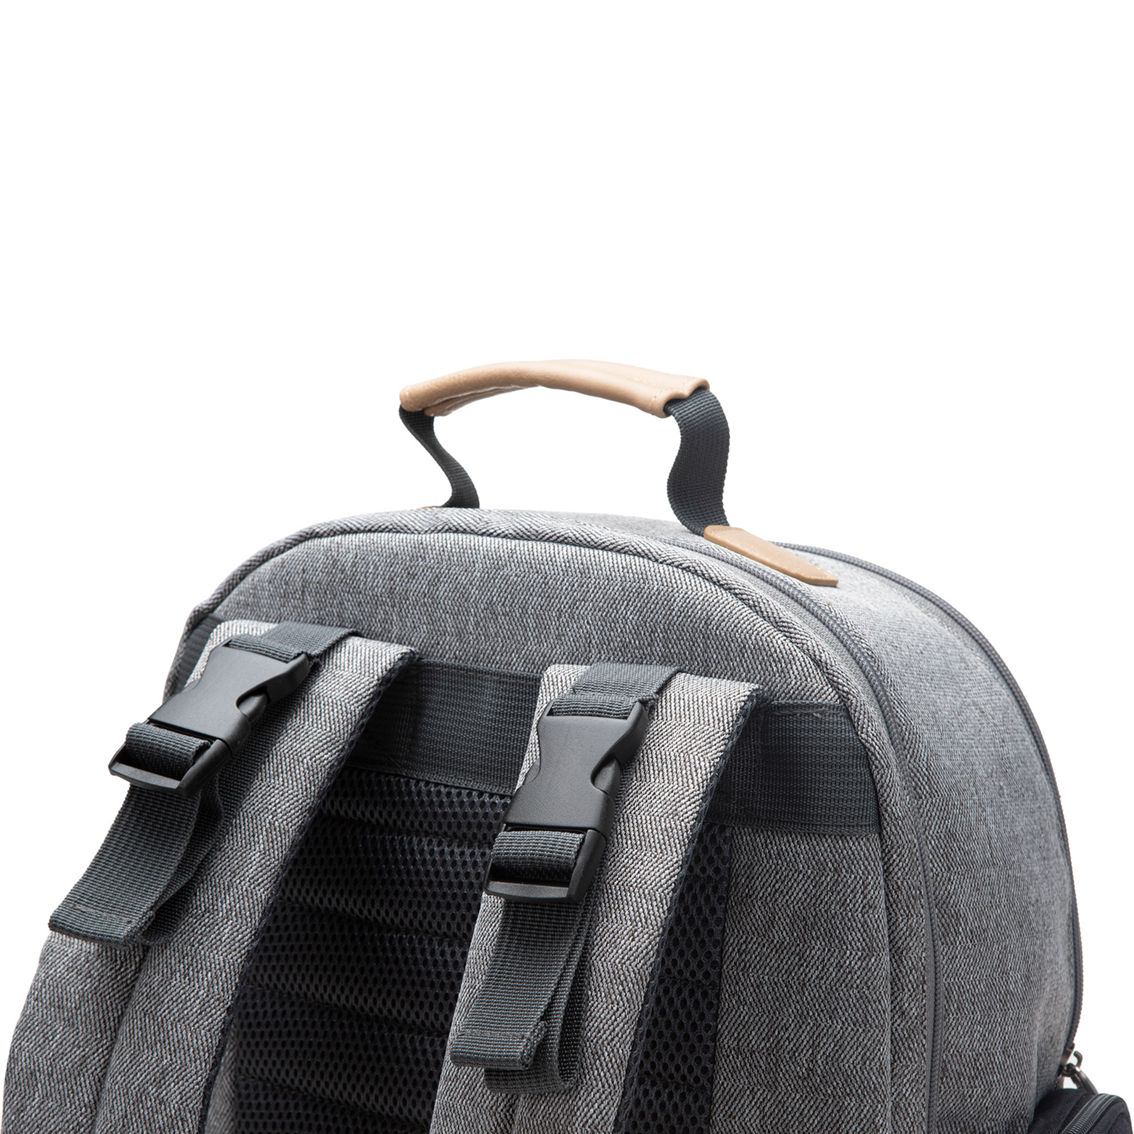 Eddie Bauer Places and Spaces Bridgeport Backpack Diaper Bag - Image 5 of 6